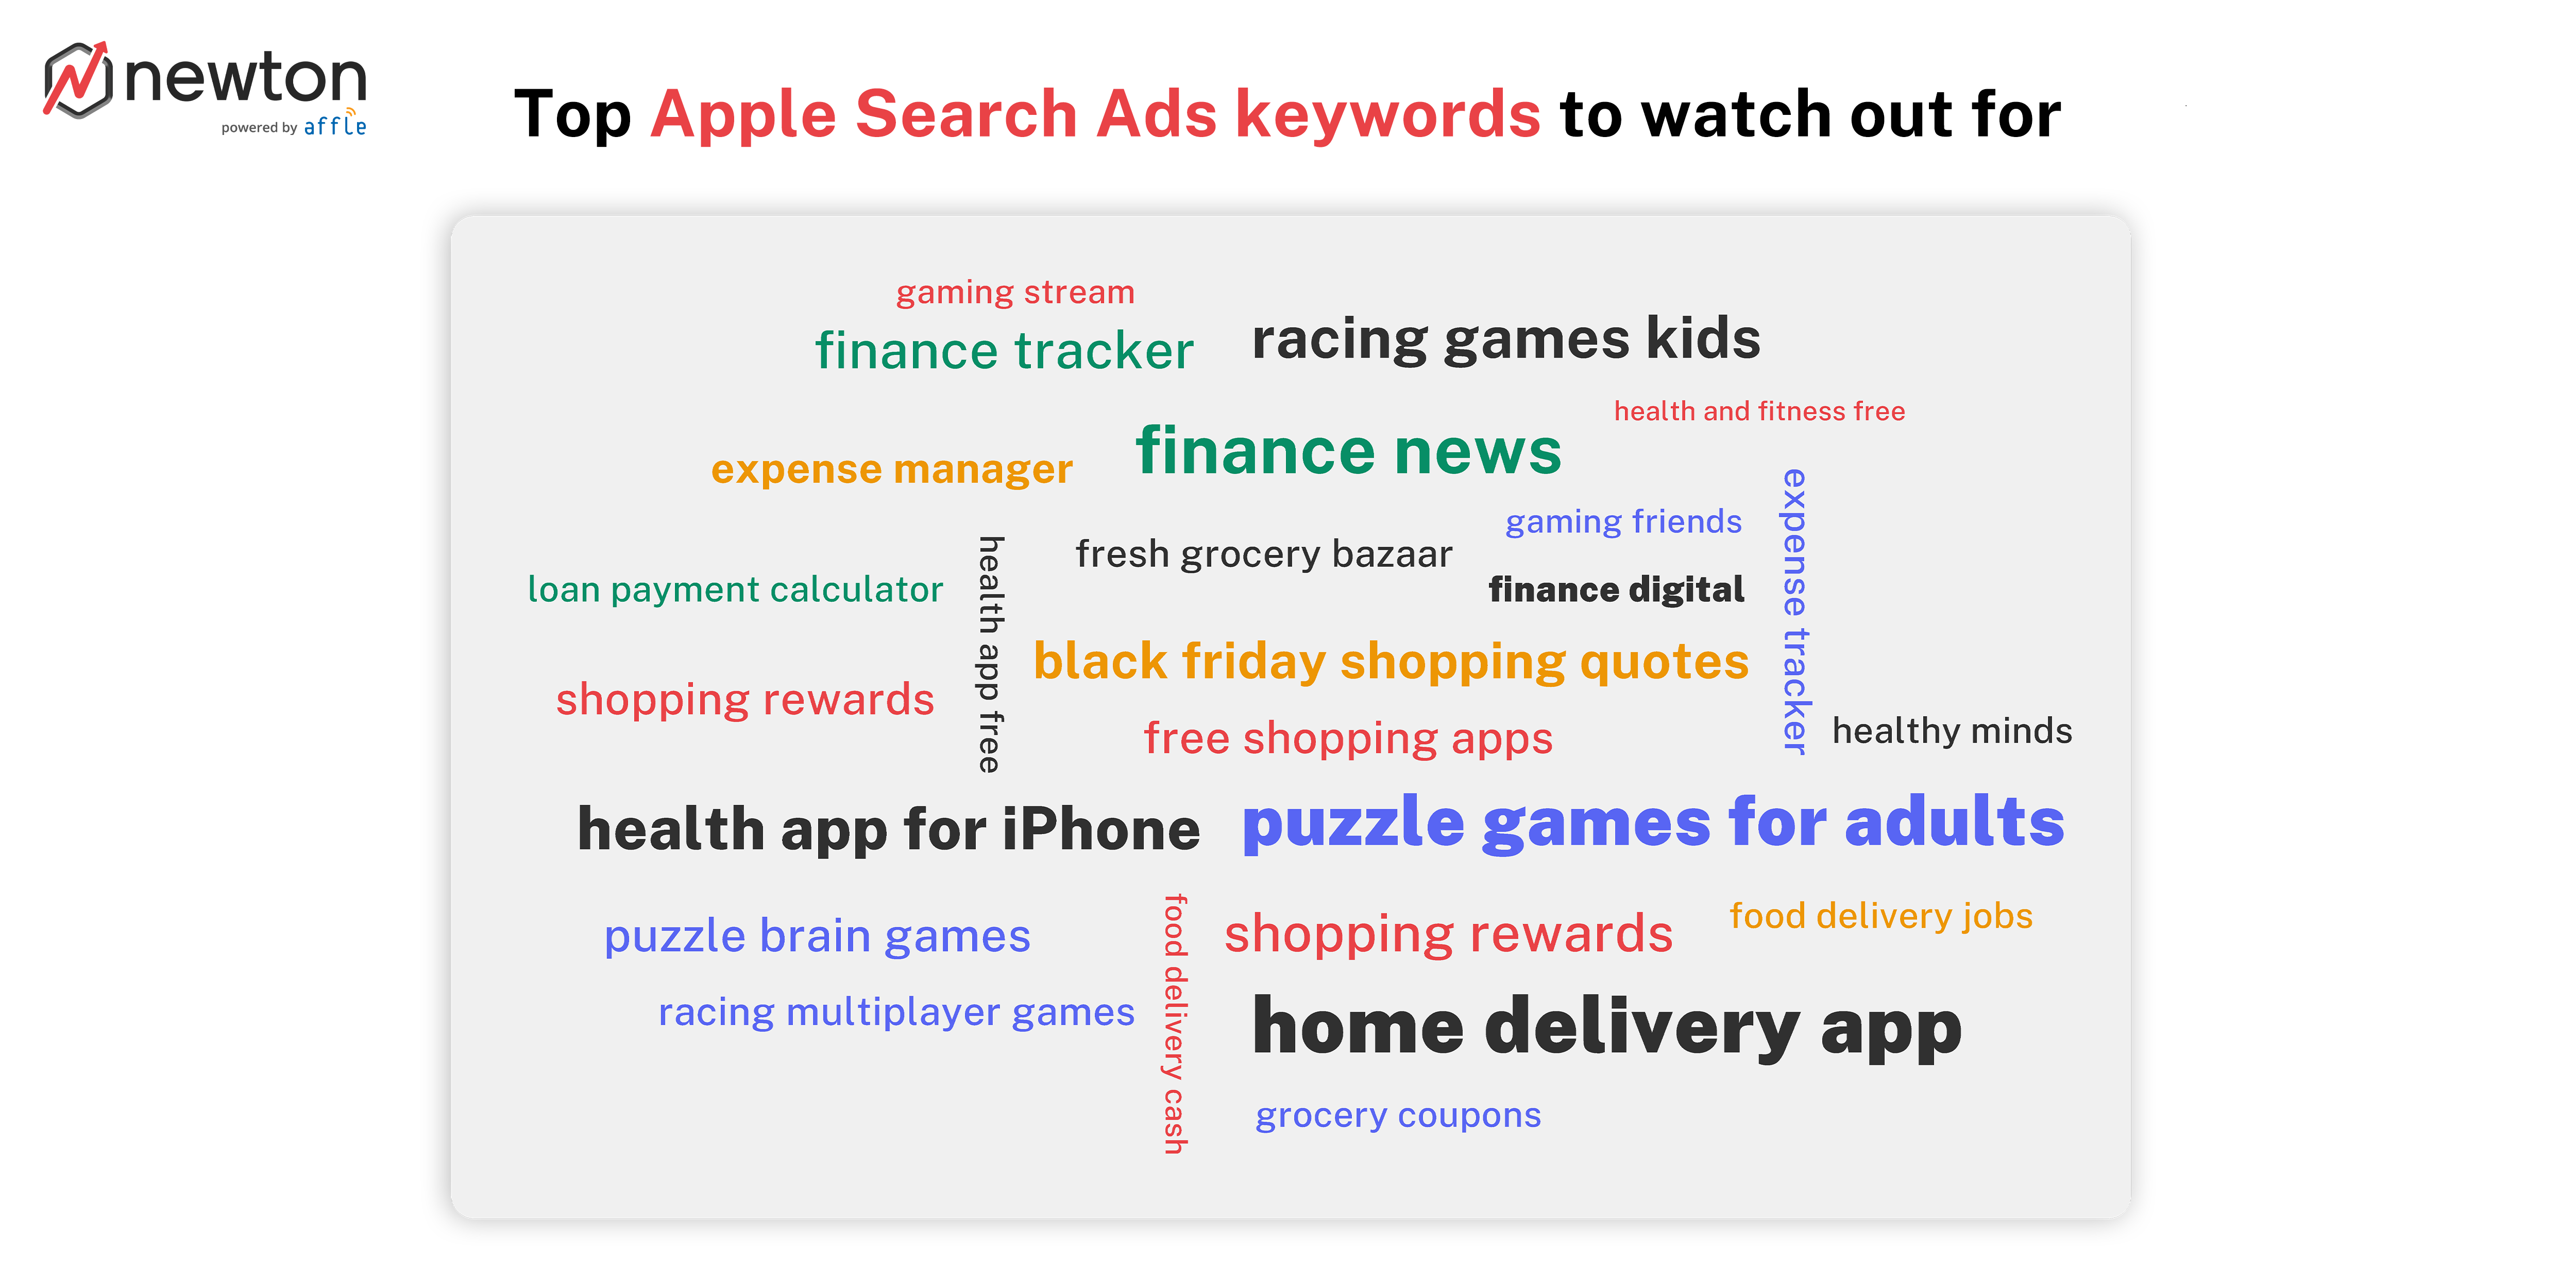 apple-search-ads-keywords-to-watch-for